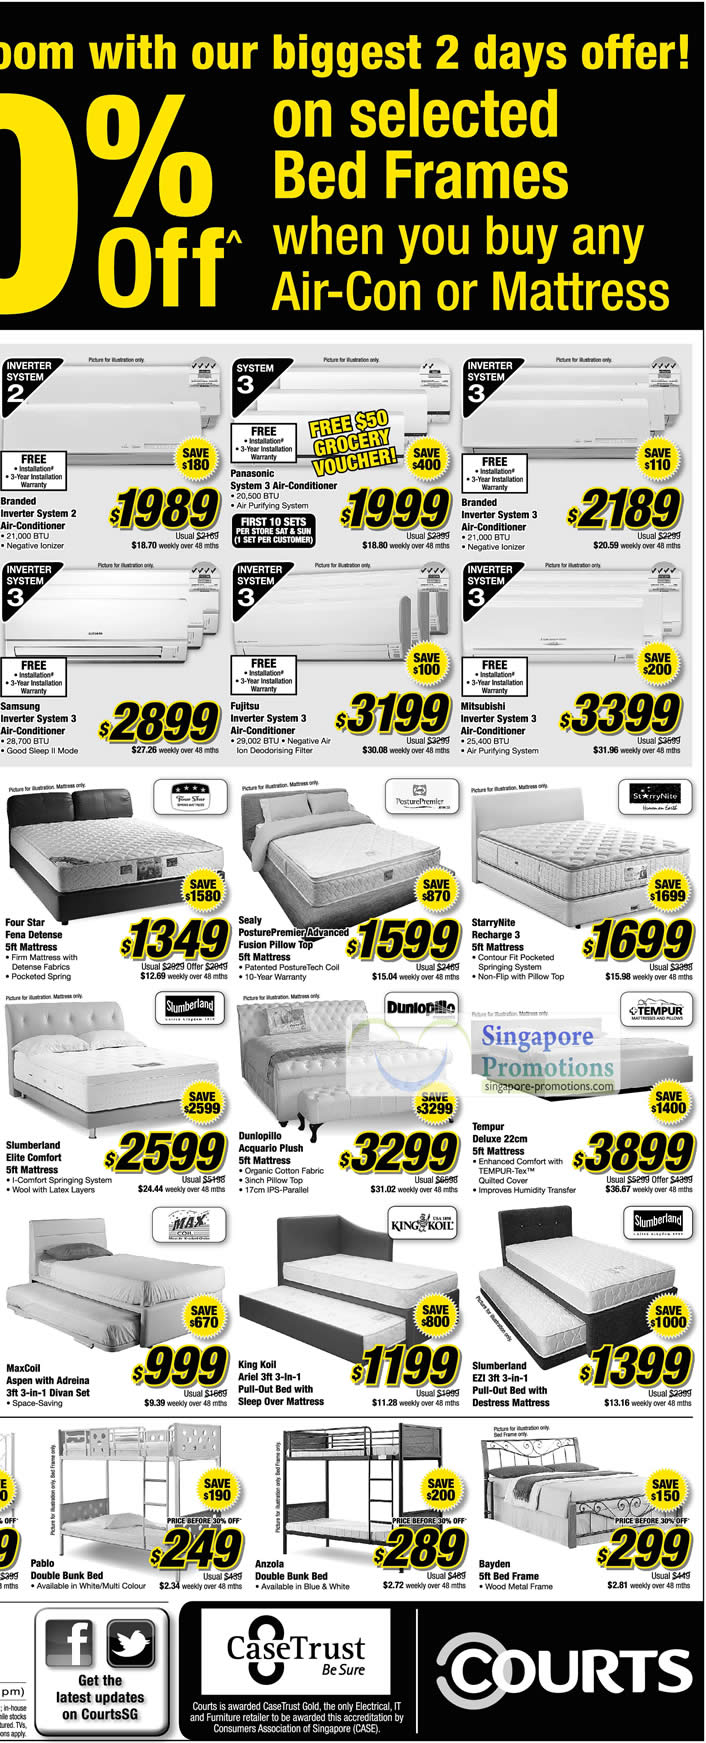 Featured image for Courts Home Sale Promotion Offers 15 - 16 Sep 2012